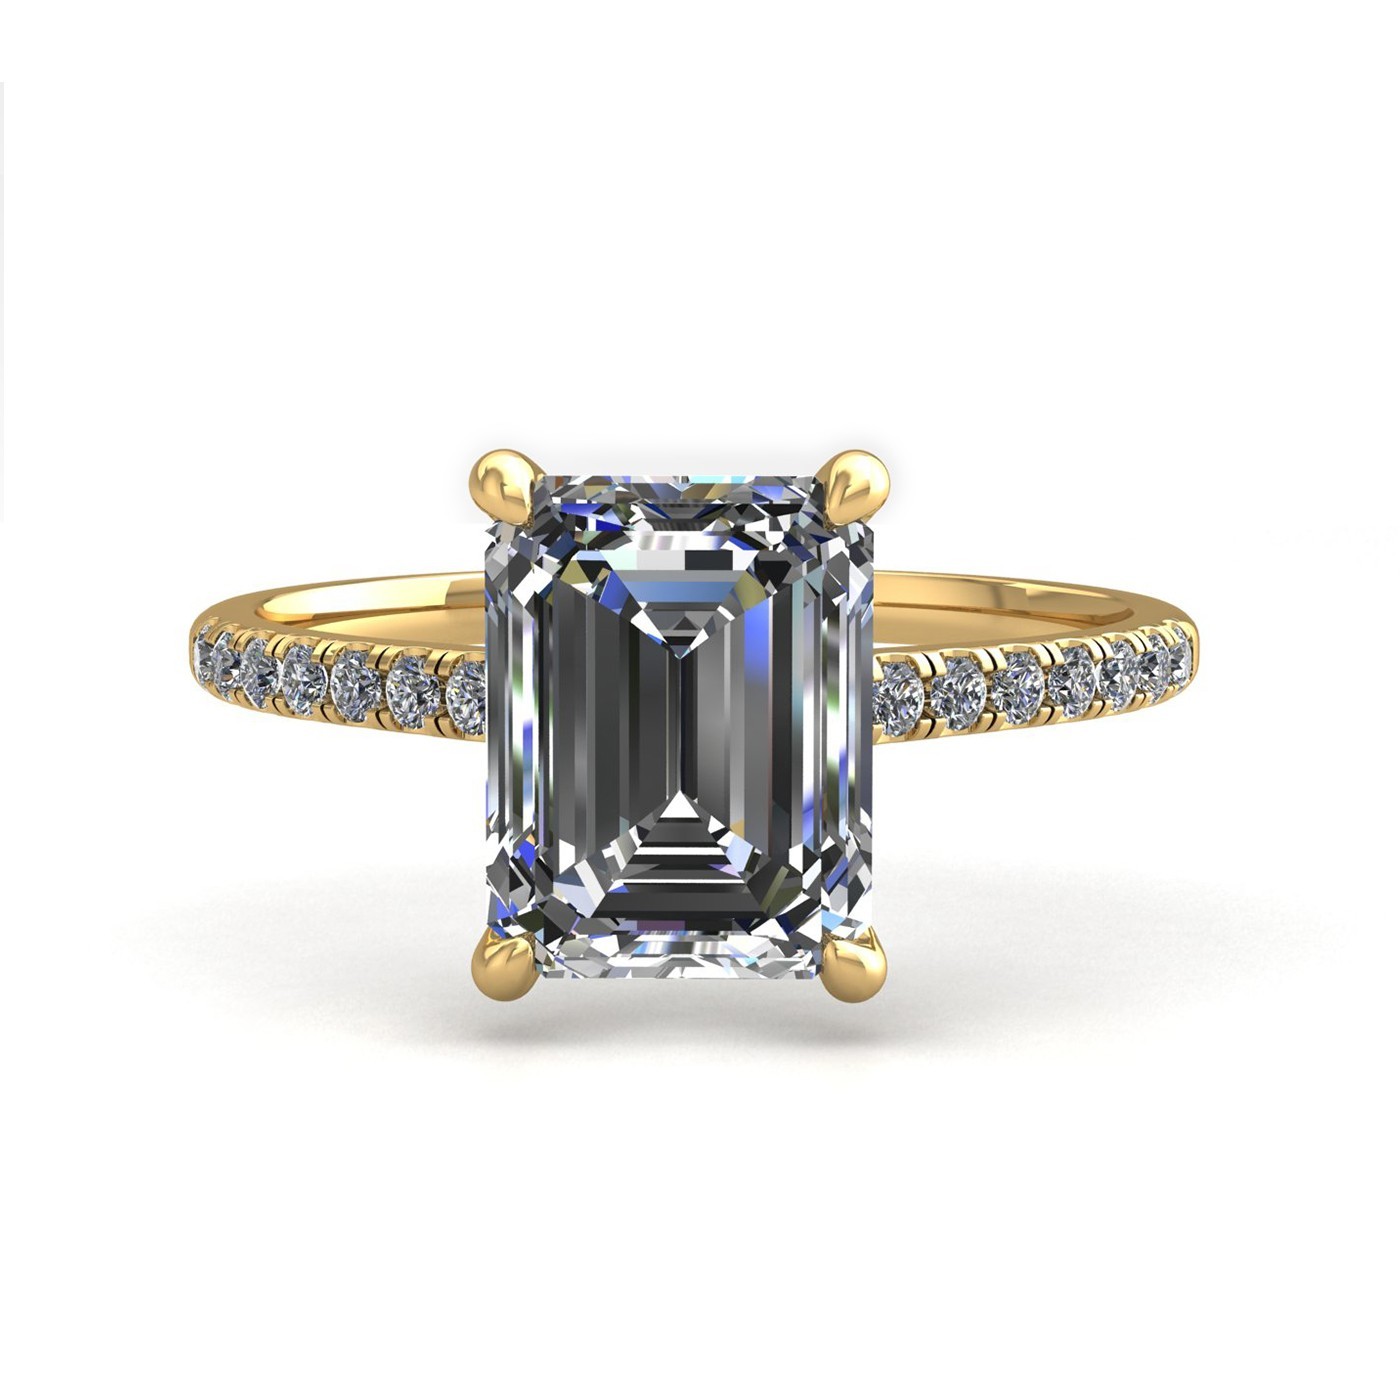 18k yellow gold 1.0ct 4 prongs emerald cut diamond engagement ring with whisper thin pavÉ set band Photos & images